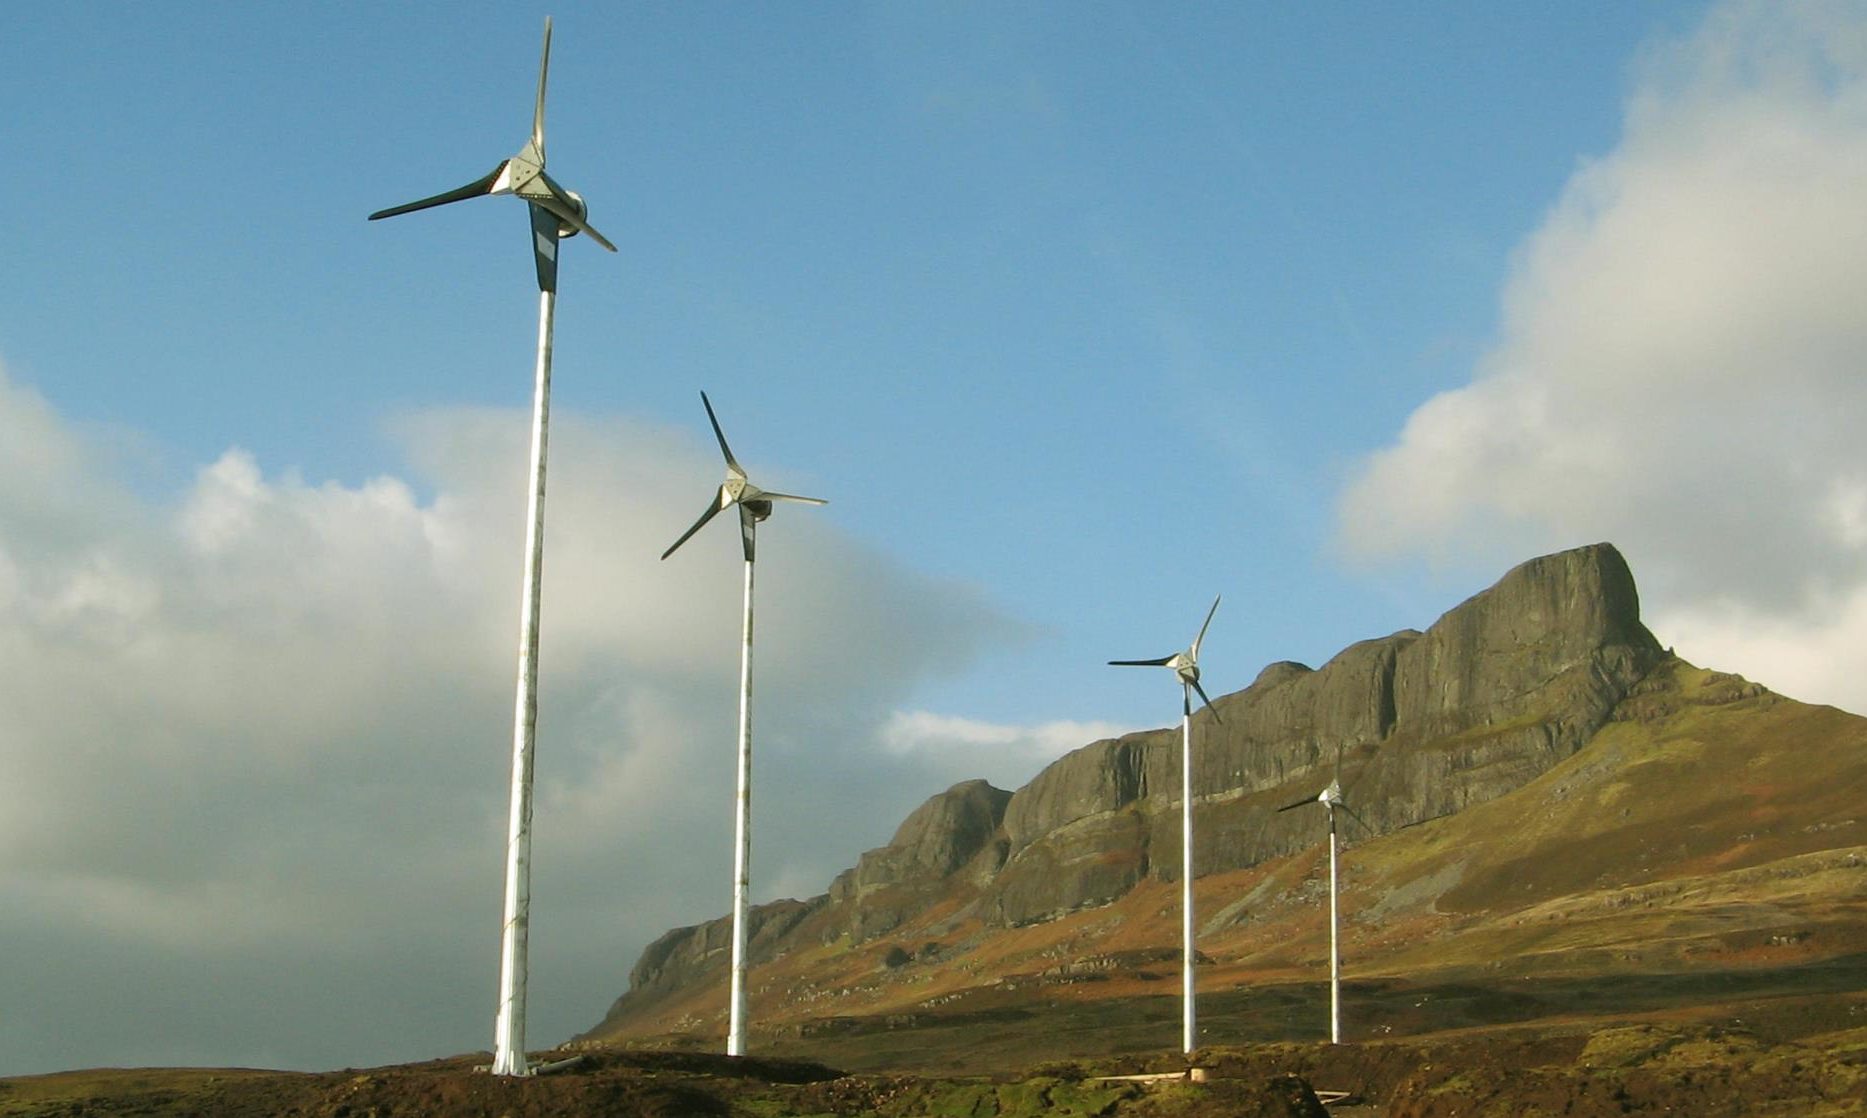 Eigg is renowned for its green energy innovations.